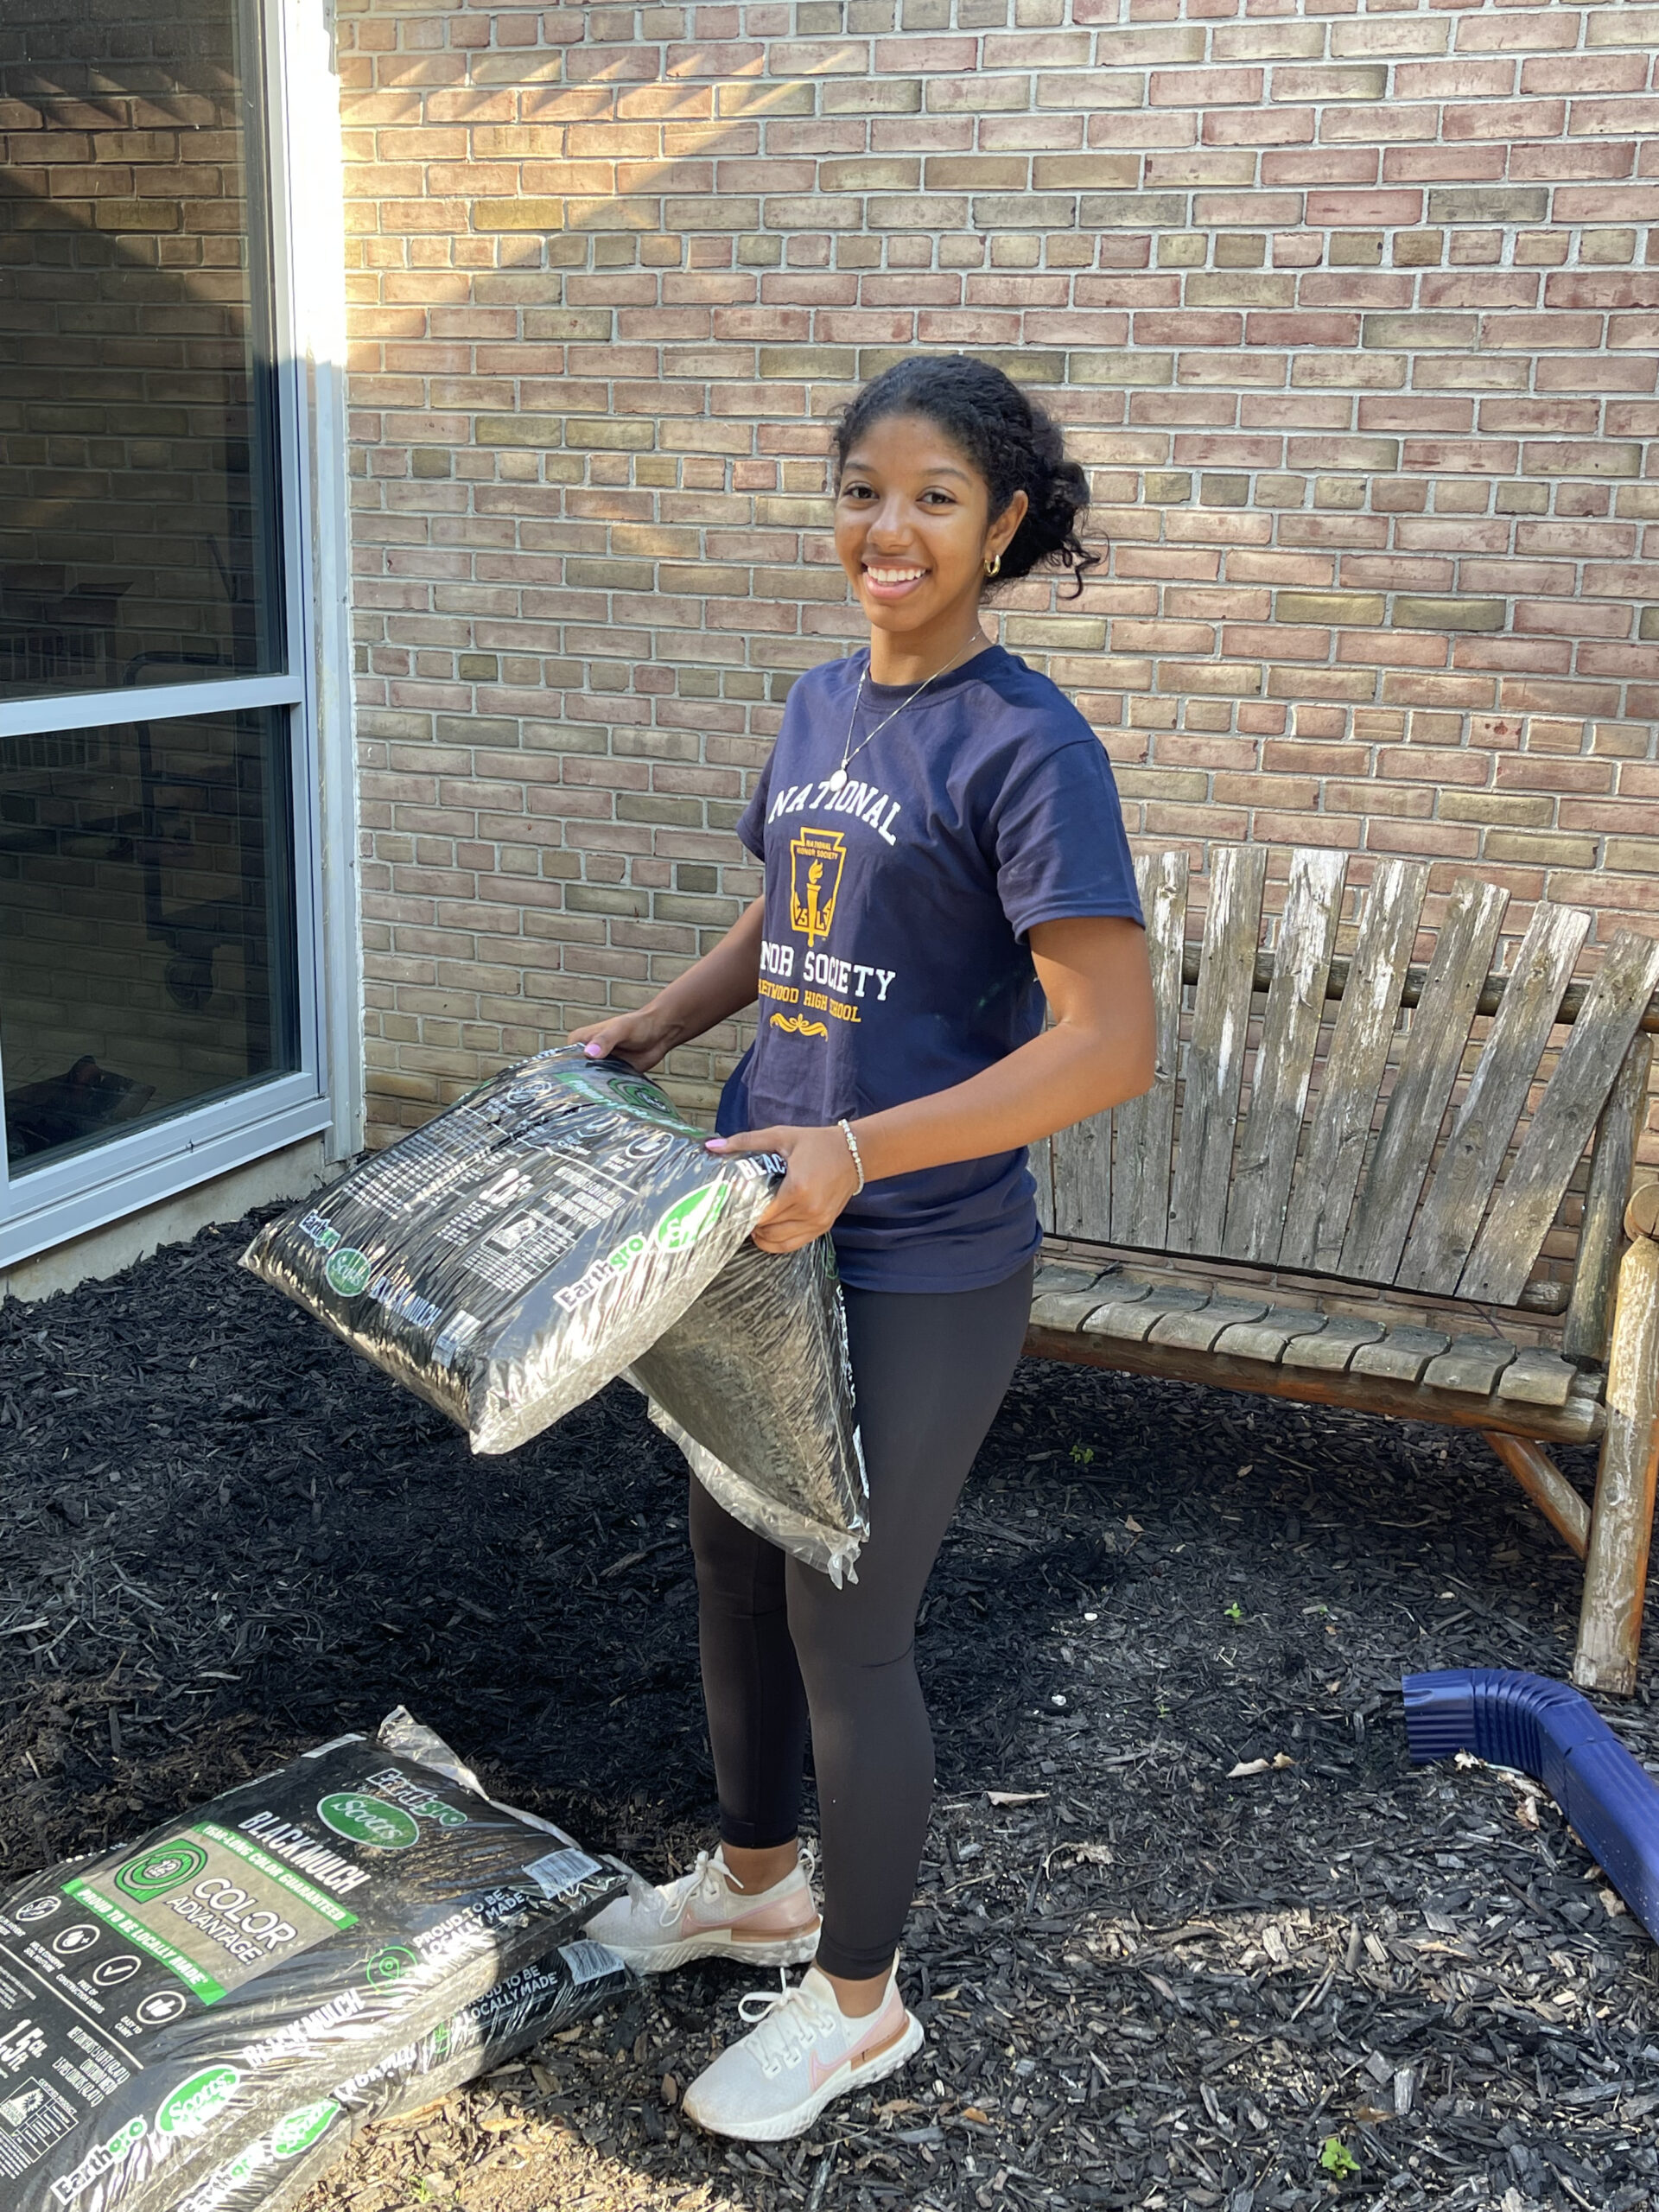 Sohair poses with bags of mulch during a community service project.